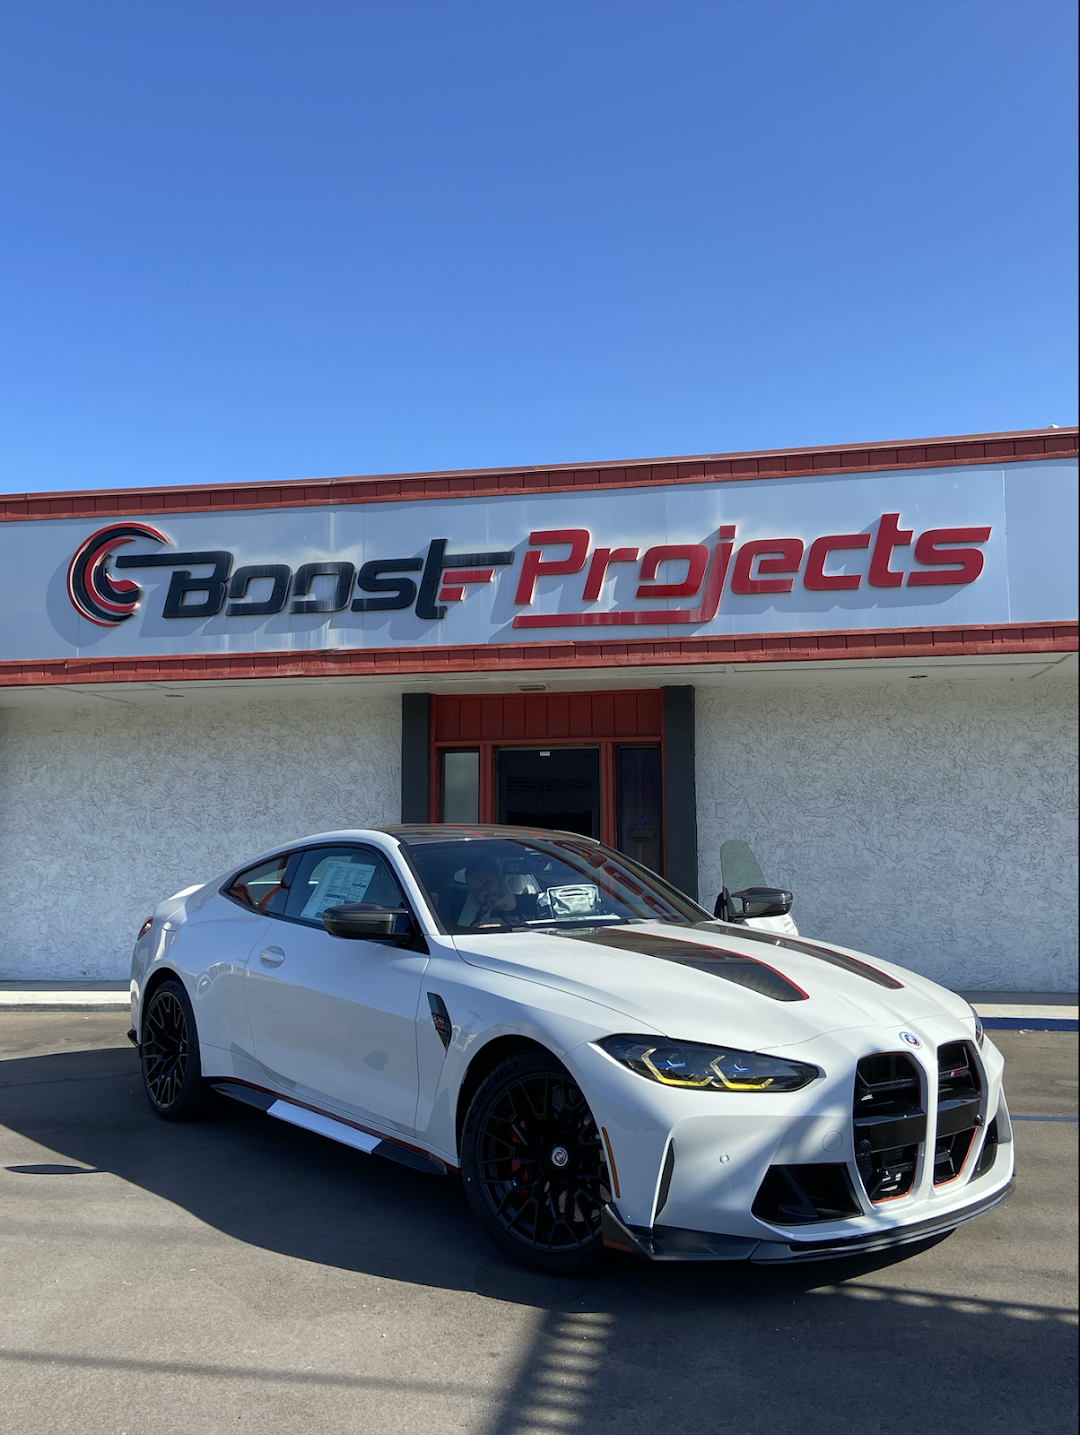 Boost Projects